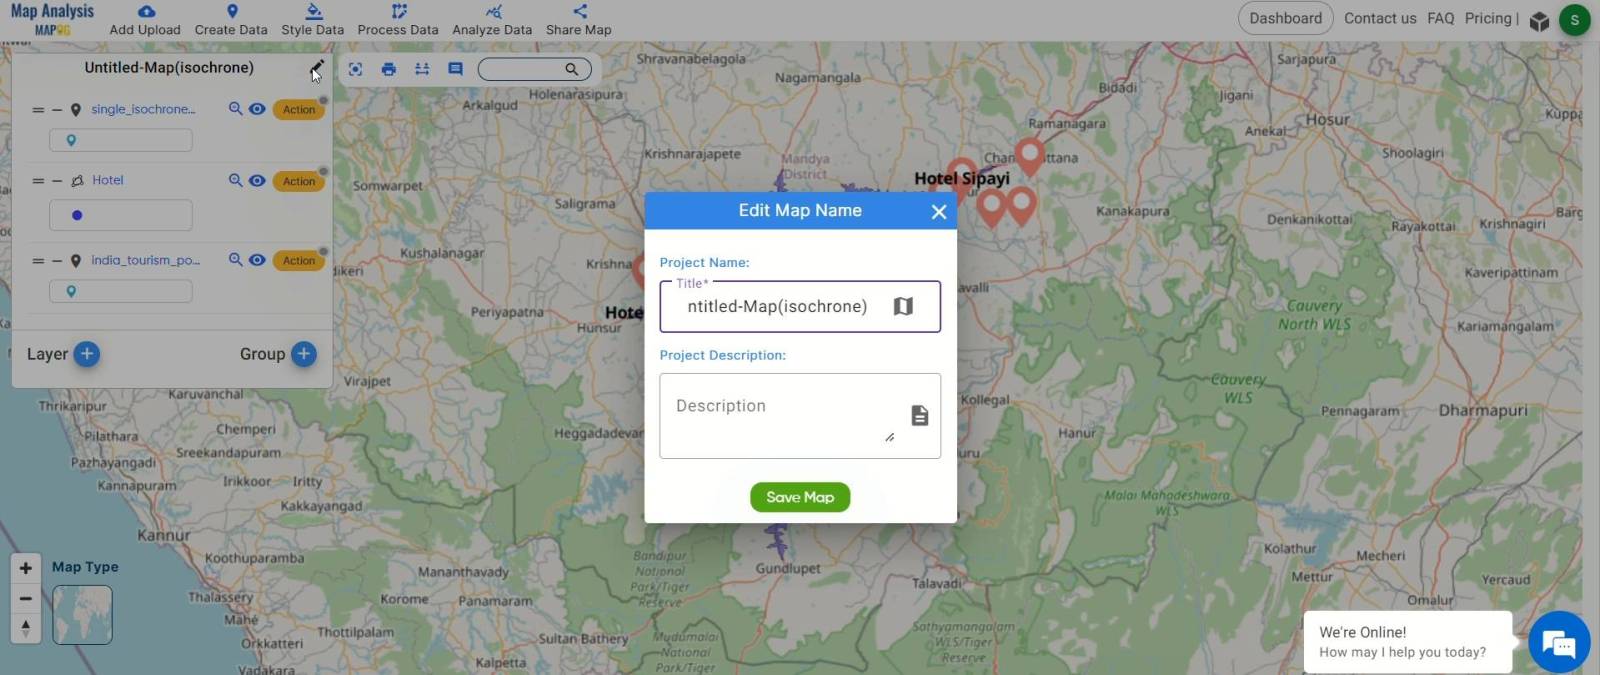 Organize and Save-Mapping Tourist Spots Nearby That You Can Reach in an Hour